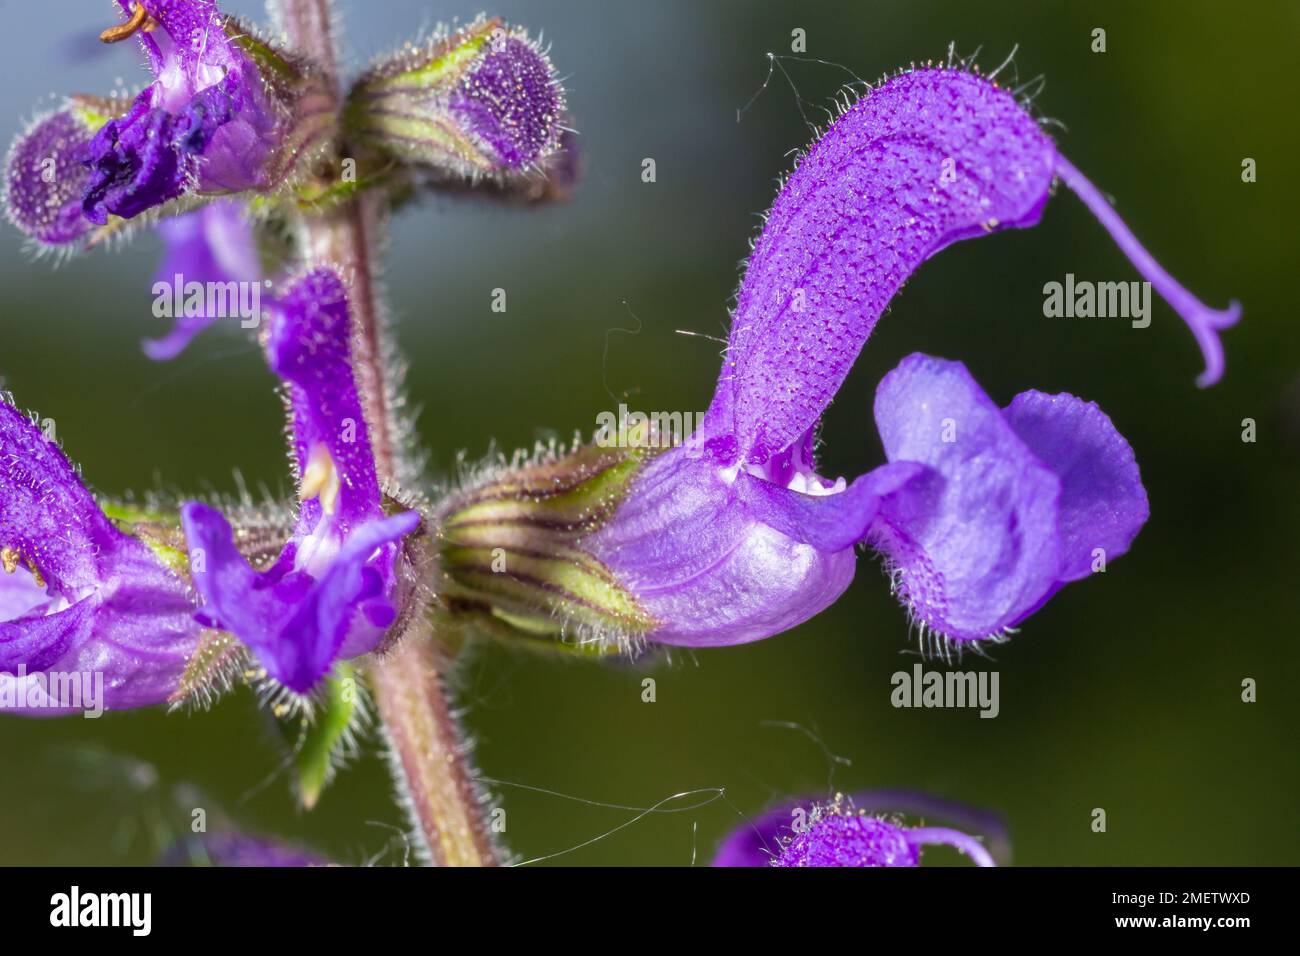 Salvia pratensis sage flowers in bloom, flowering blue violet purple mmeadow clary plants, green grass leaves. Stock Photo